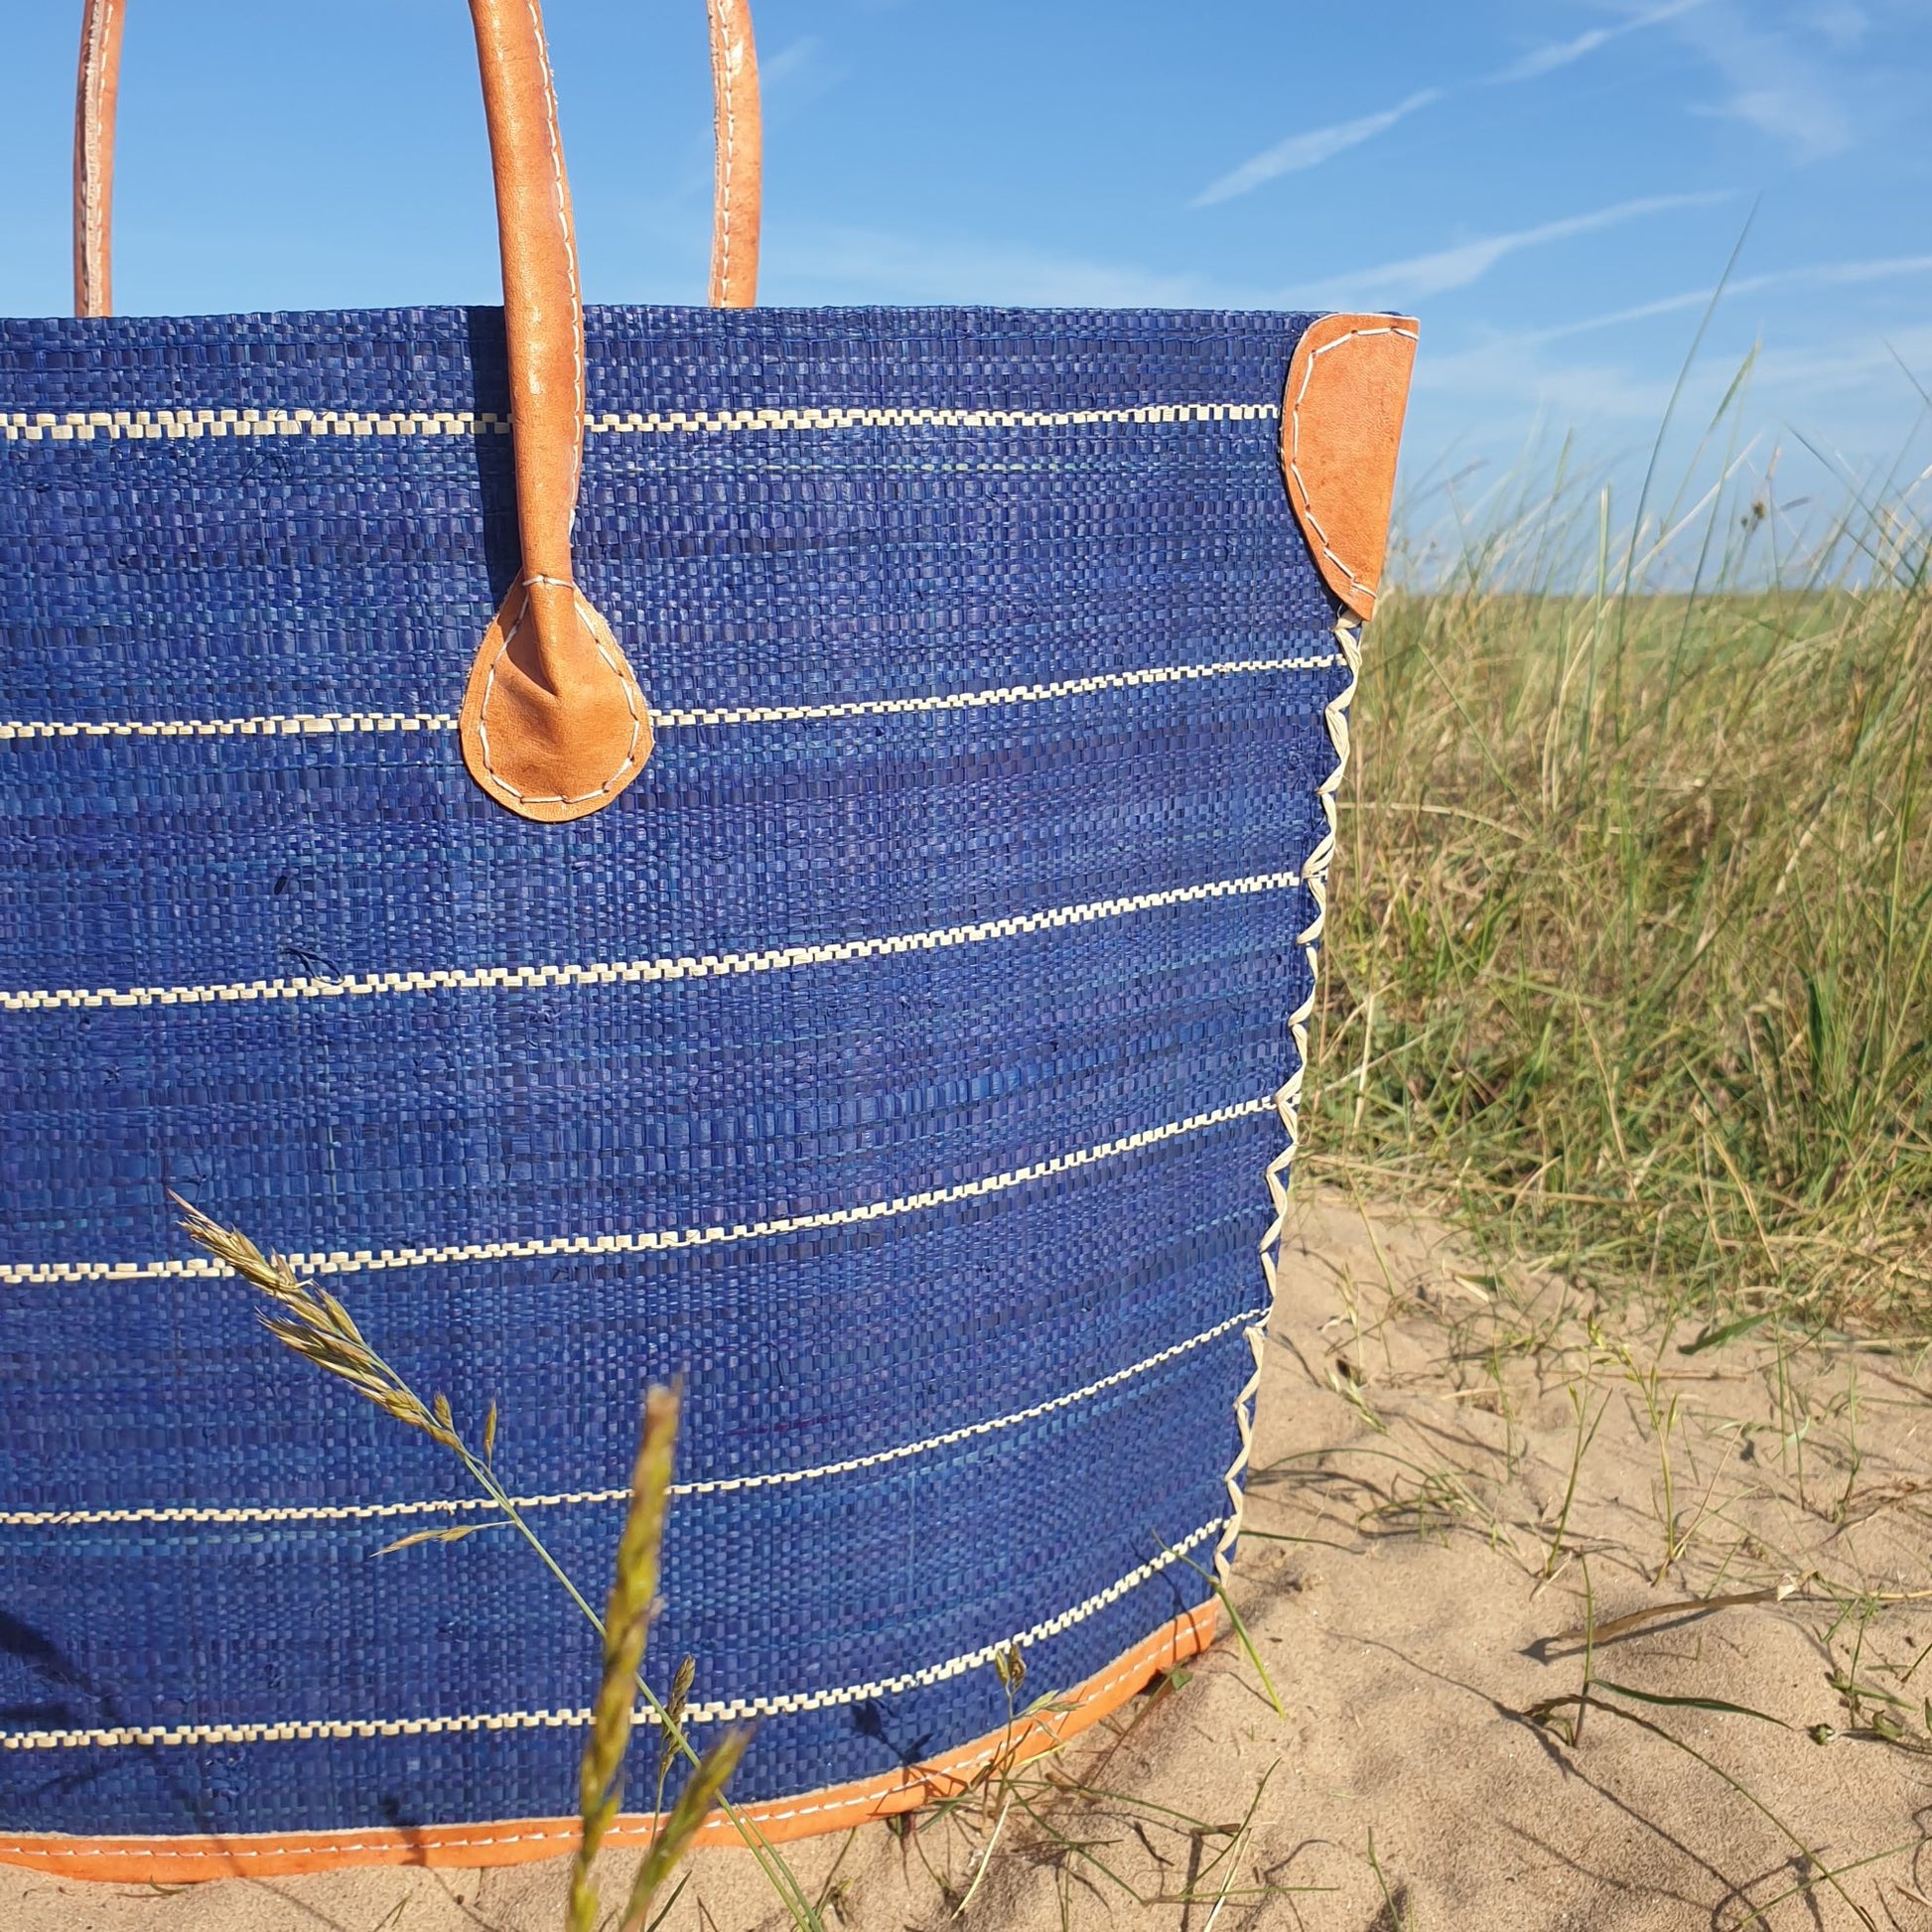 Navy Pinstriped Raffia Basket with leather handles and leather trim.